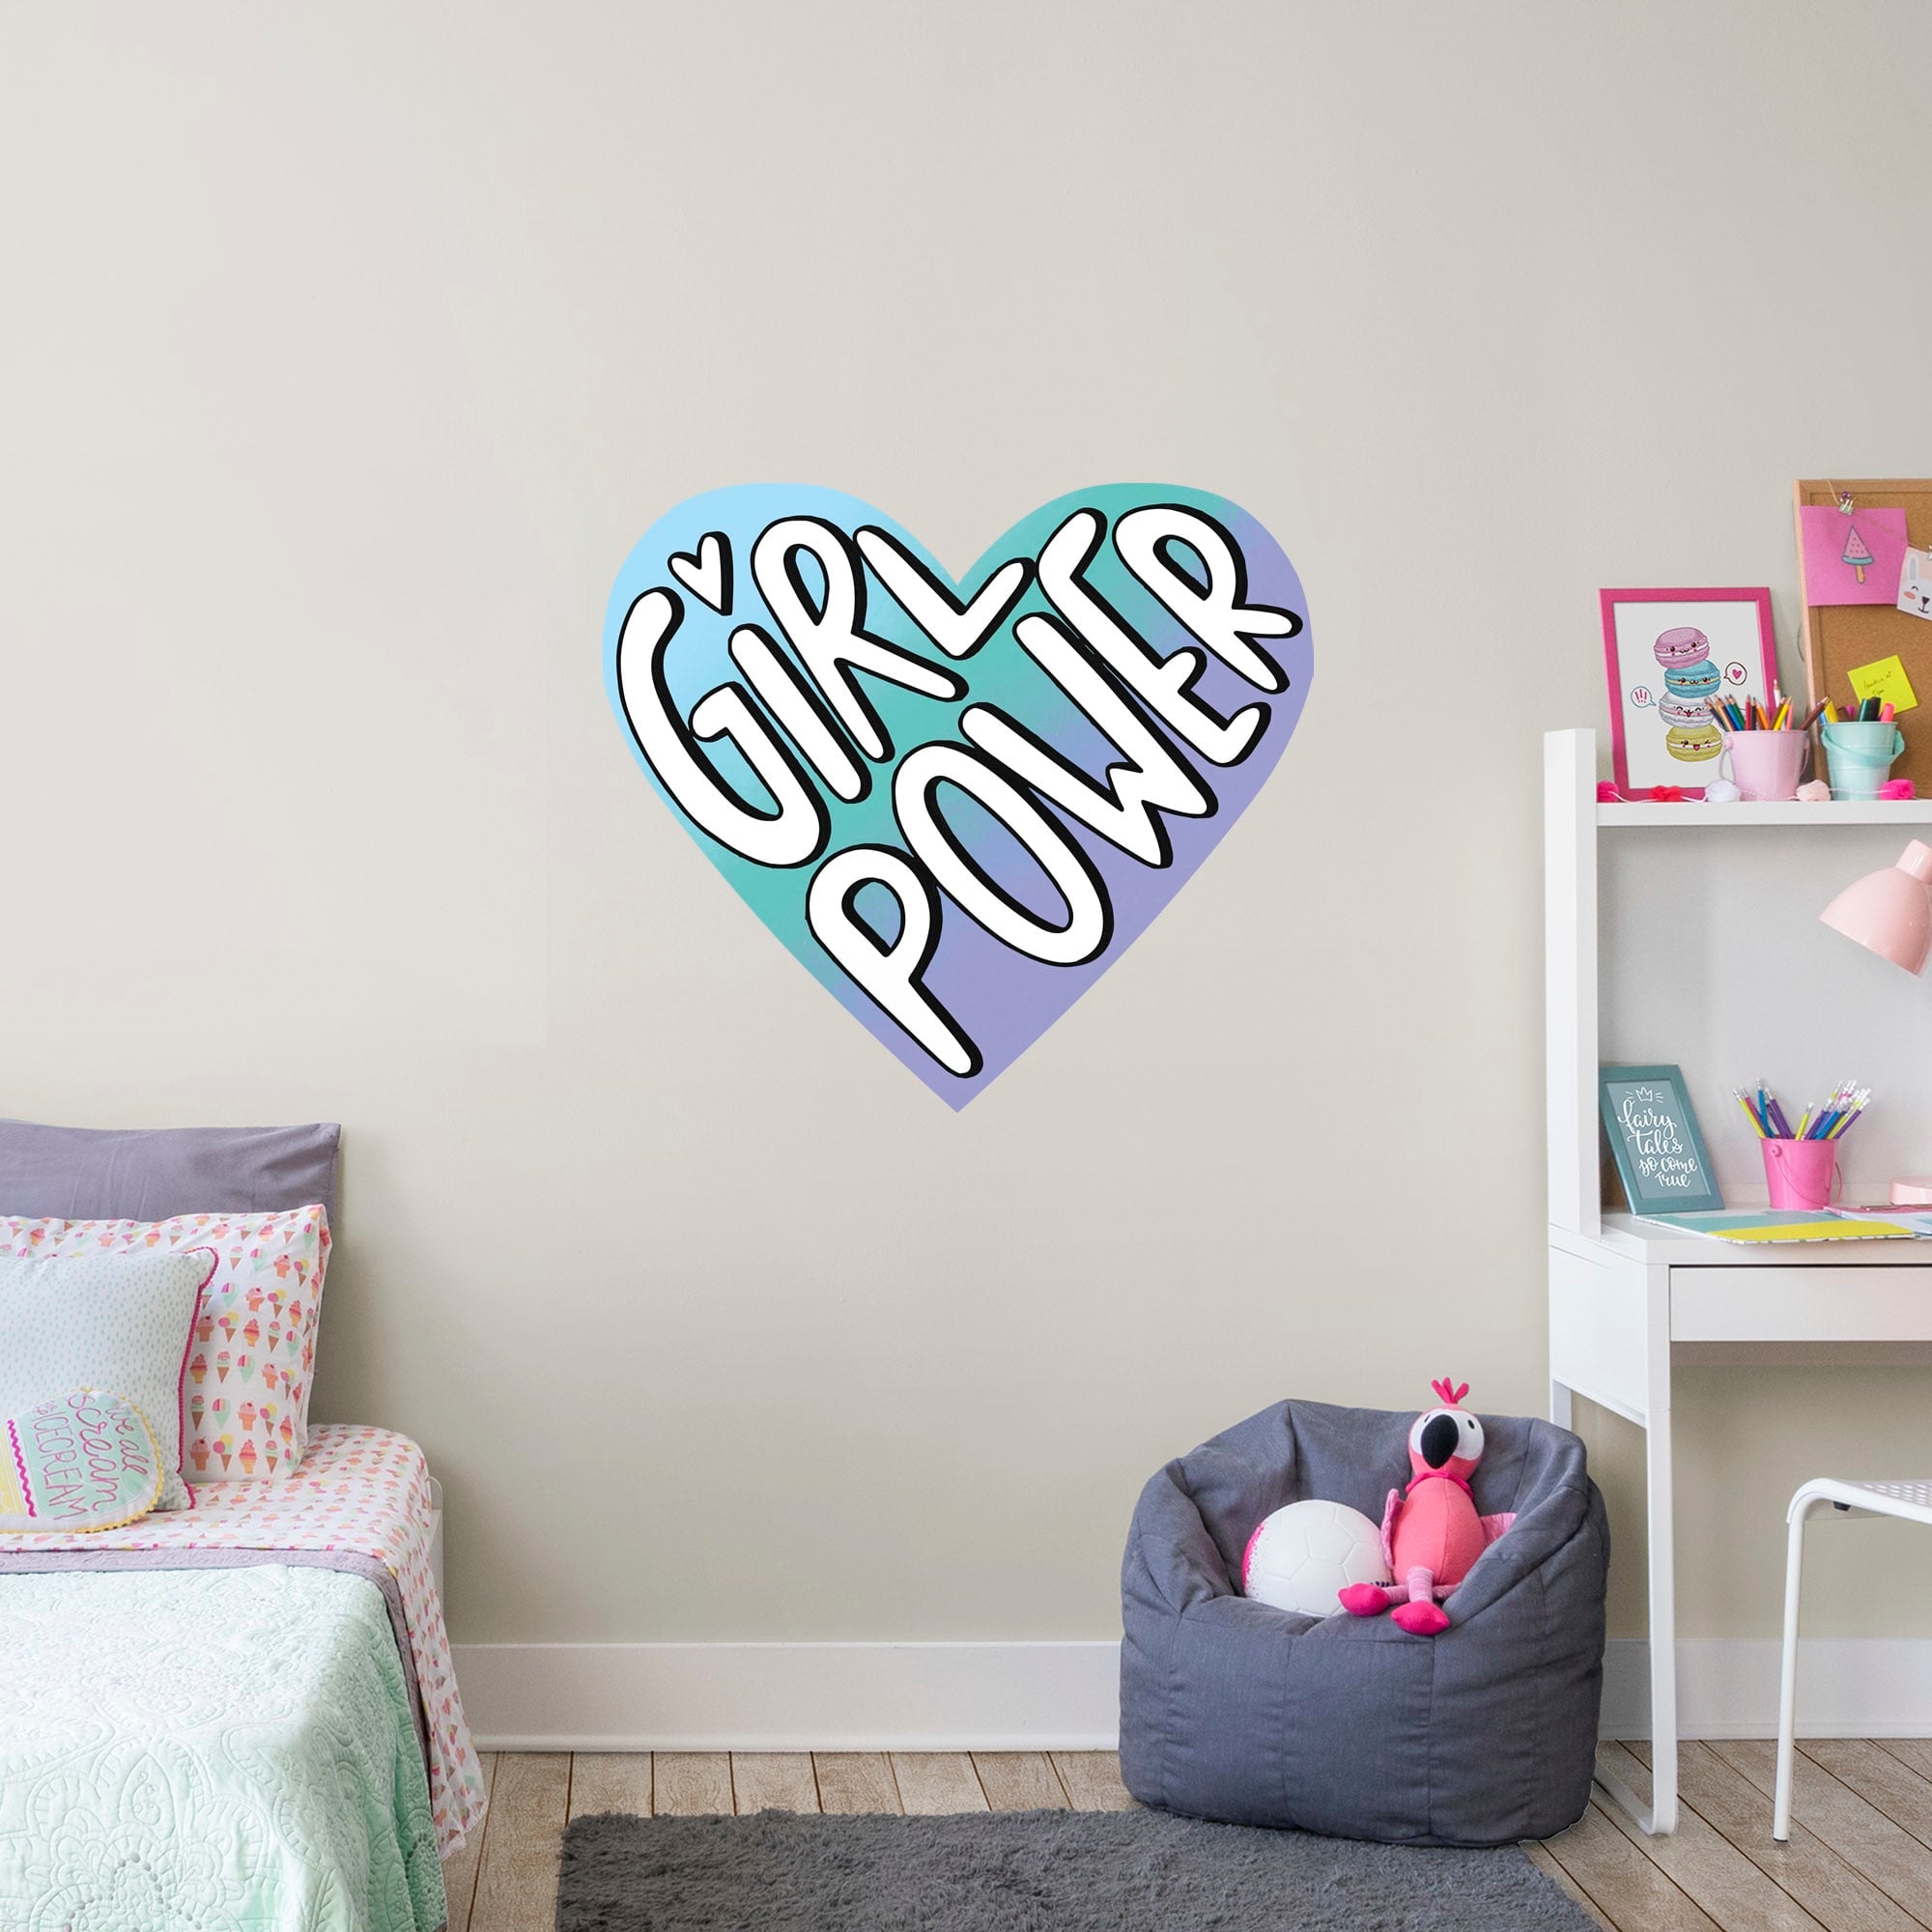 Girl Power Heart - Big Moods Removable Adhesive Wall Decal Giant Icon 40W x 36H